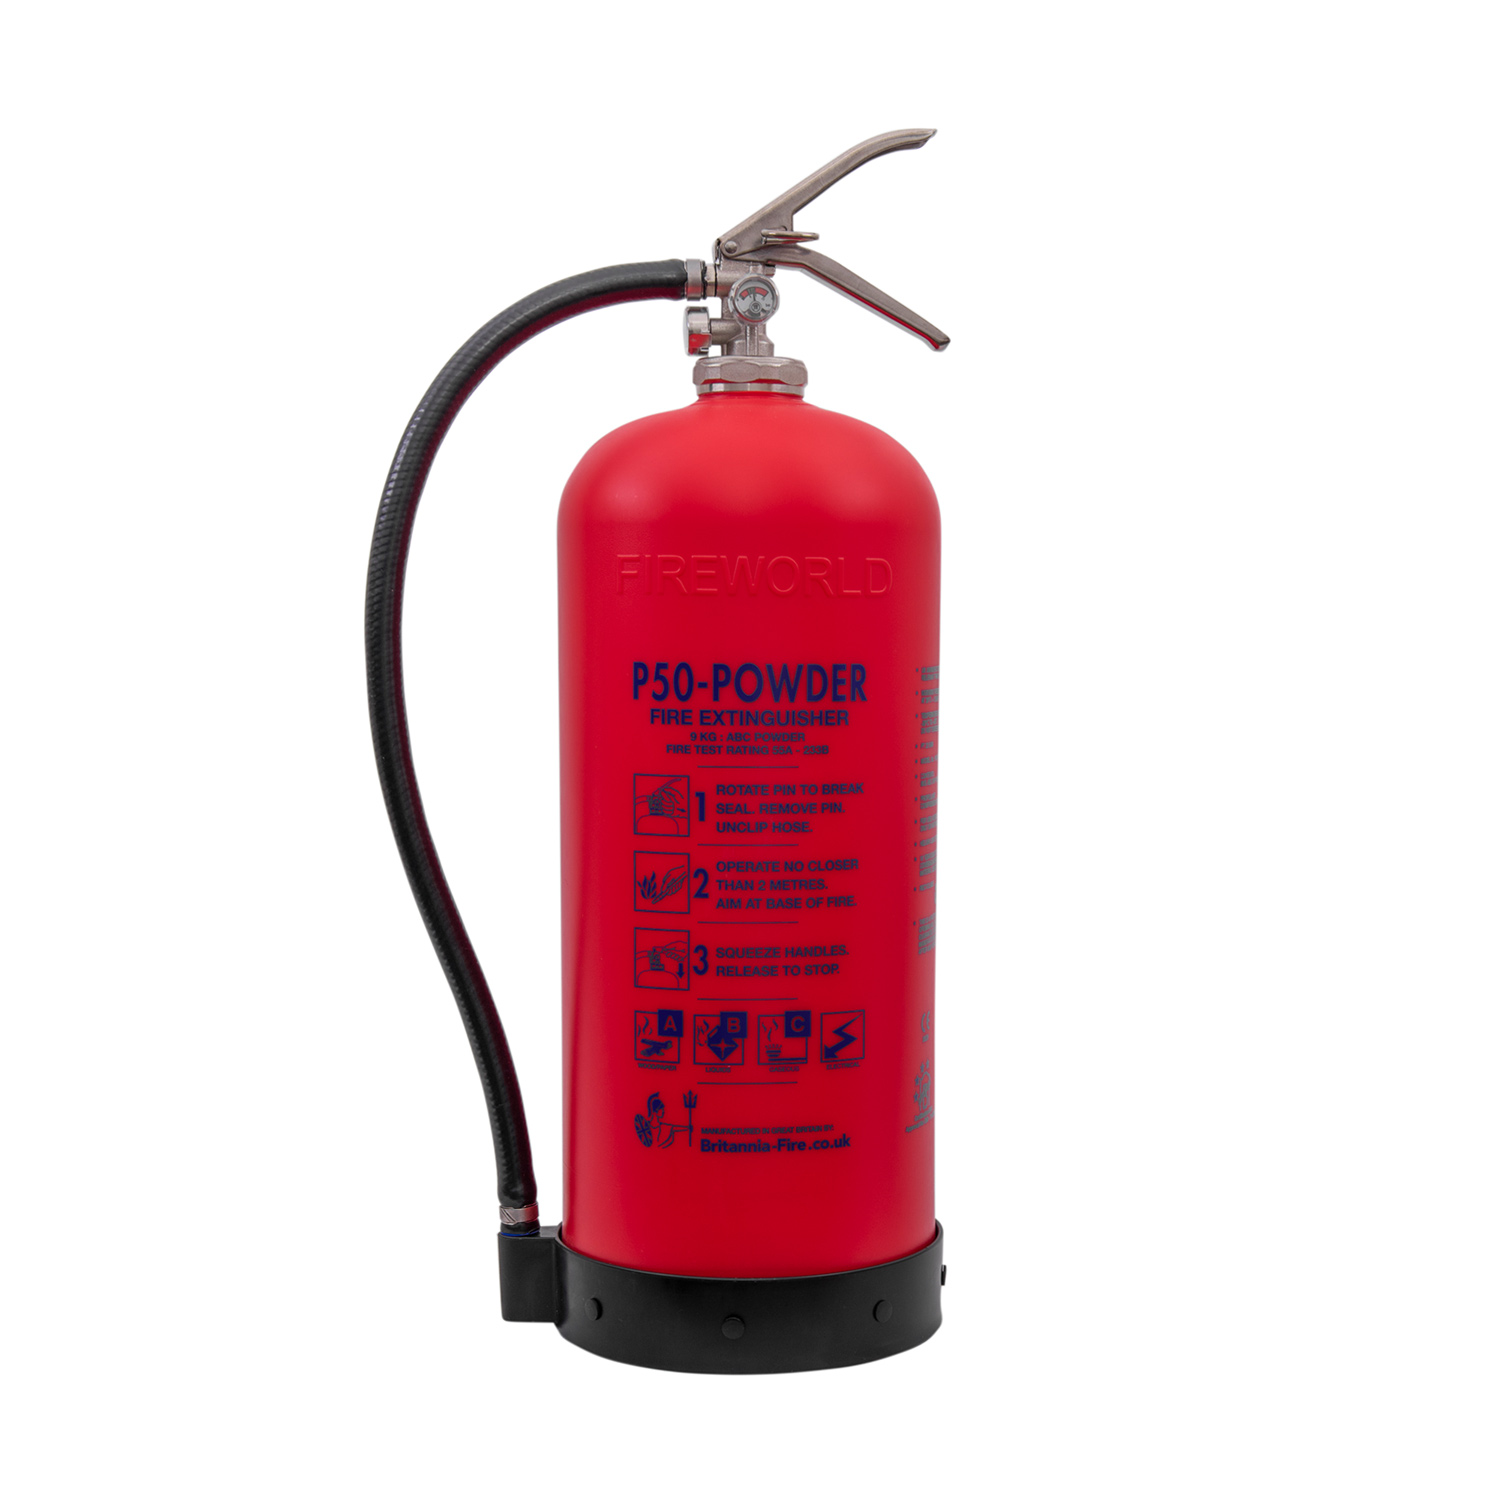 Image of the P50 9kg Powder Fire Extinguisher